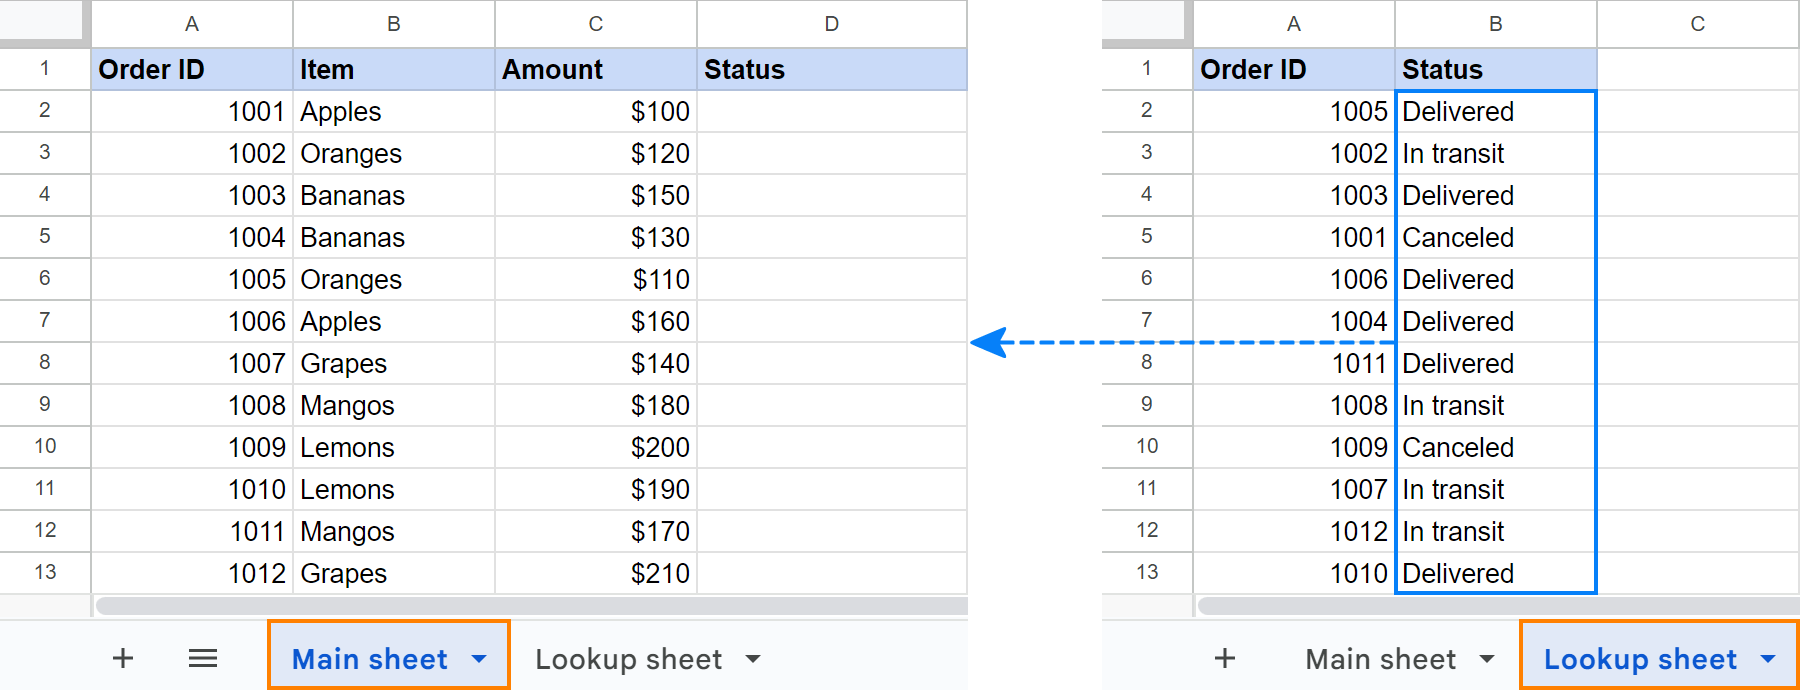 Source data to merge sheets based on the key column